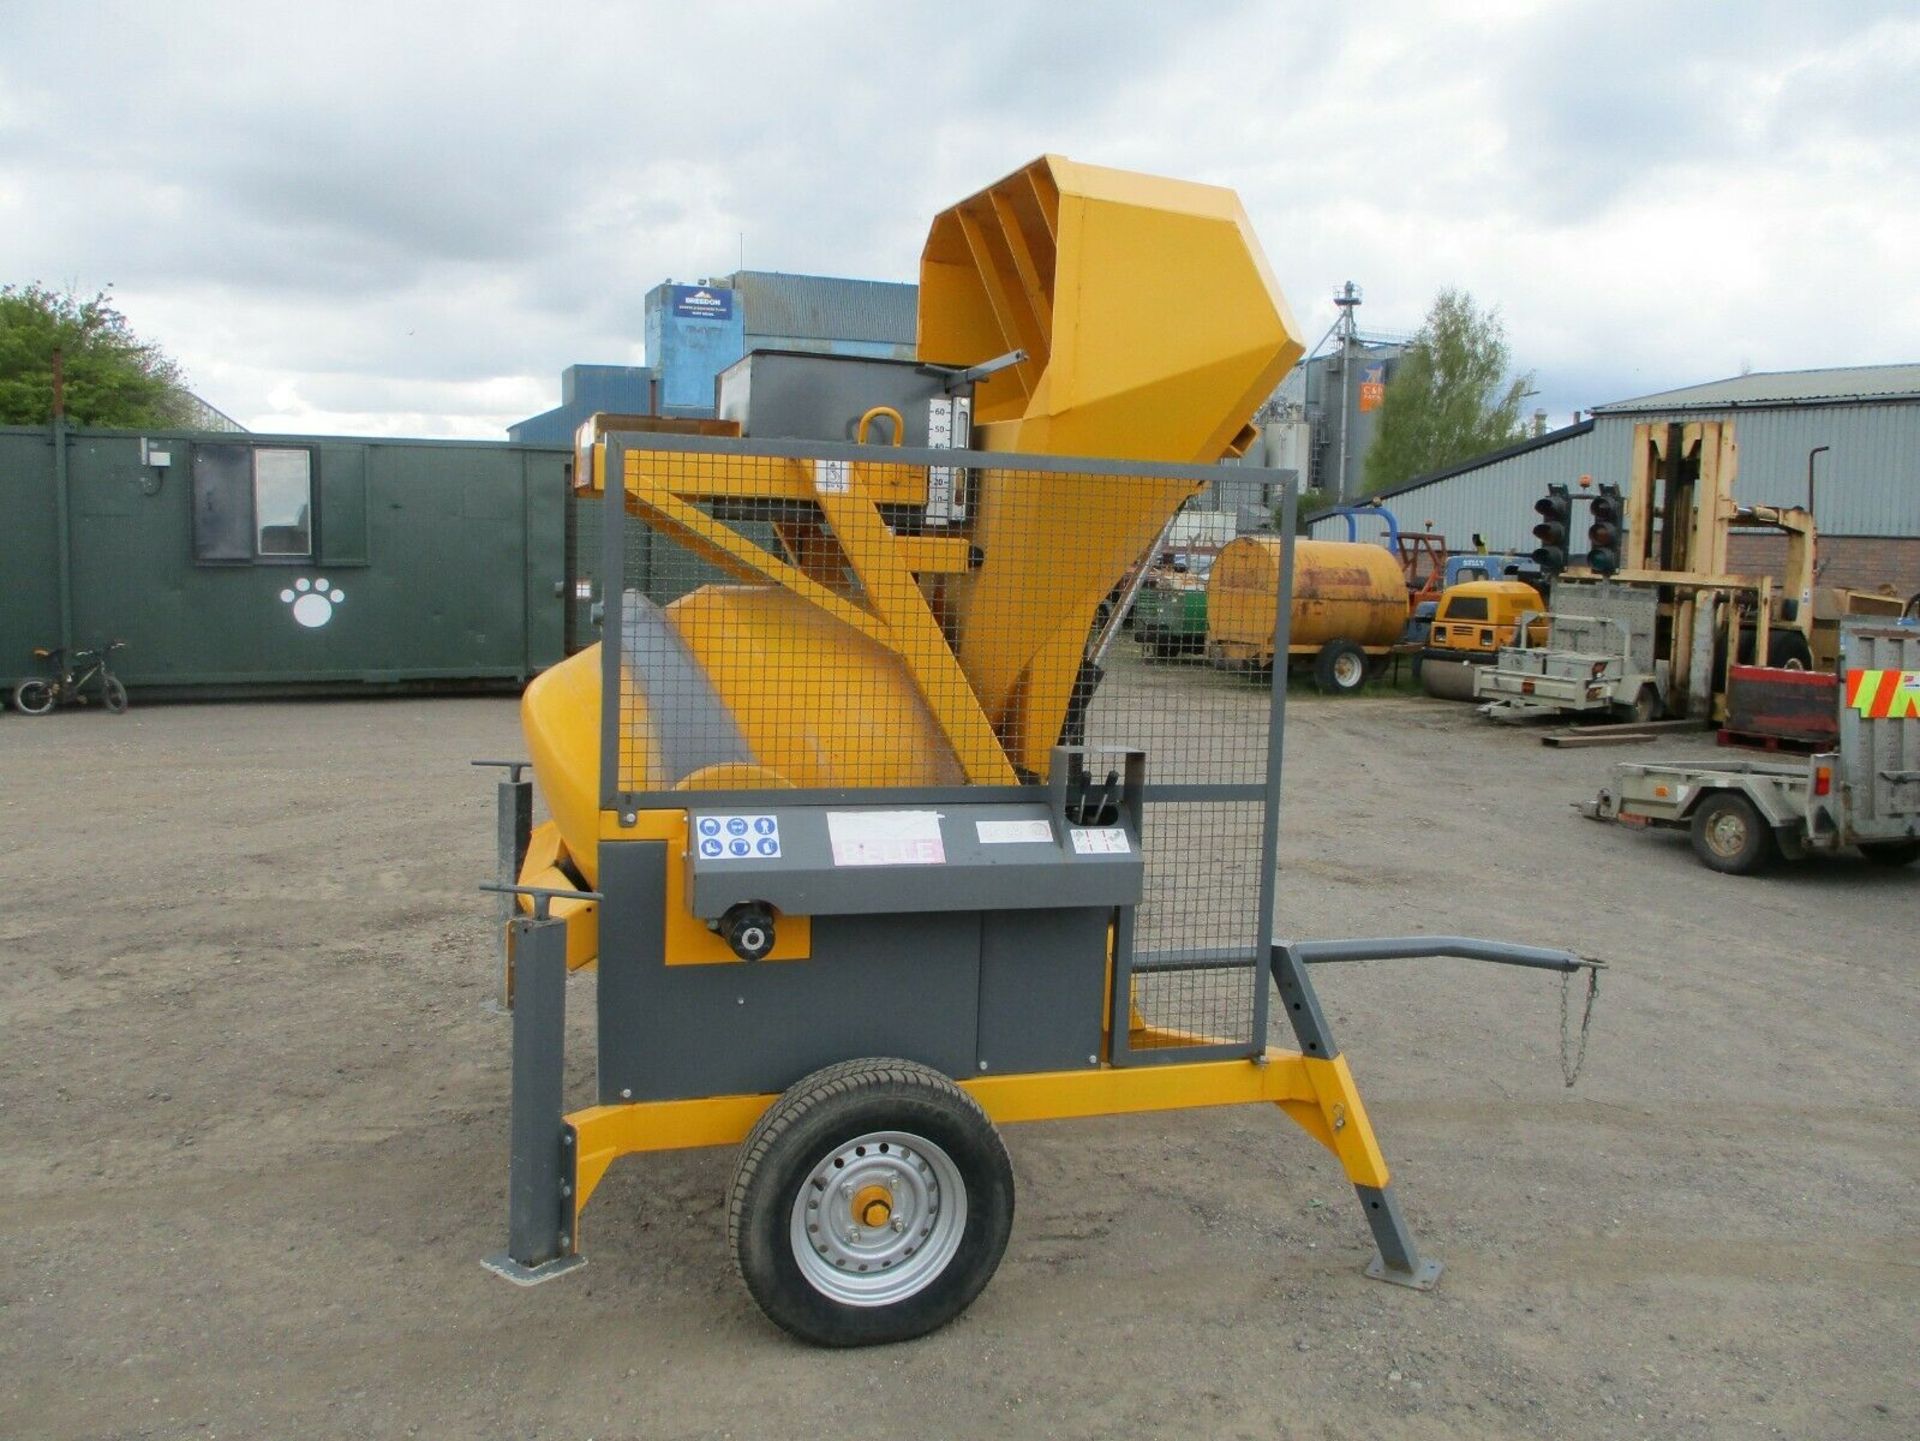 2019 Altrad Belle RB500B self loading diesel cement mixer - Image 5 of 8